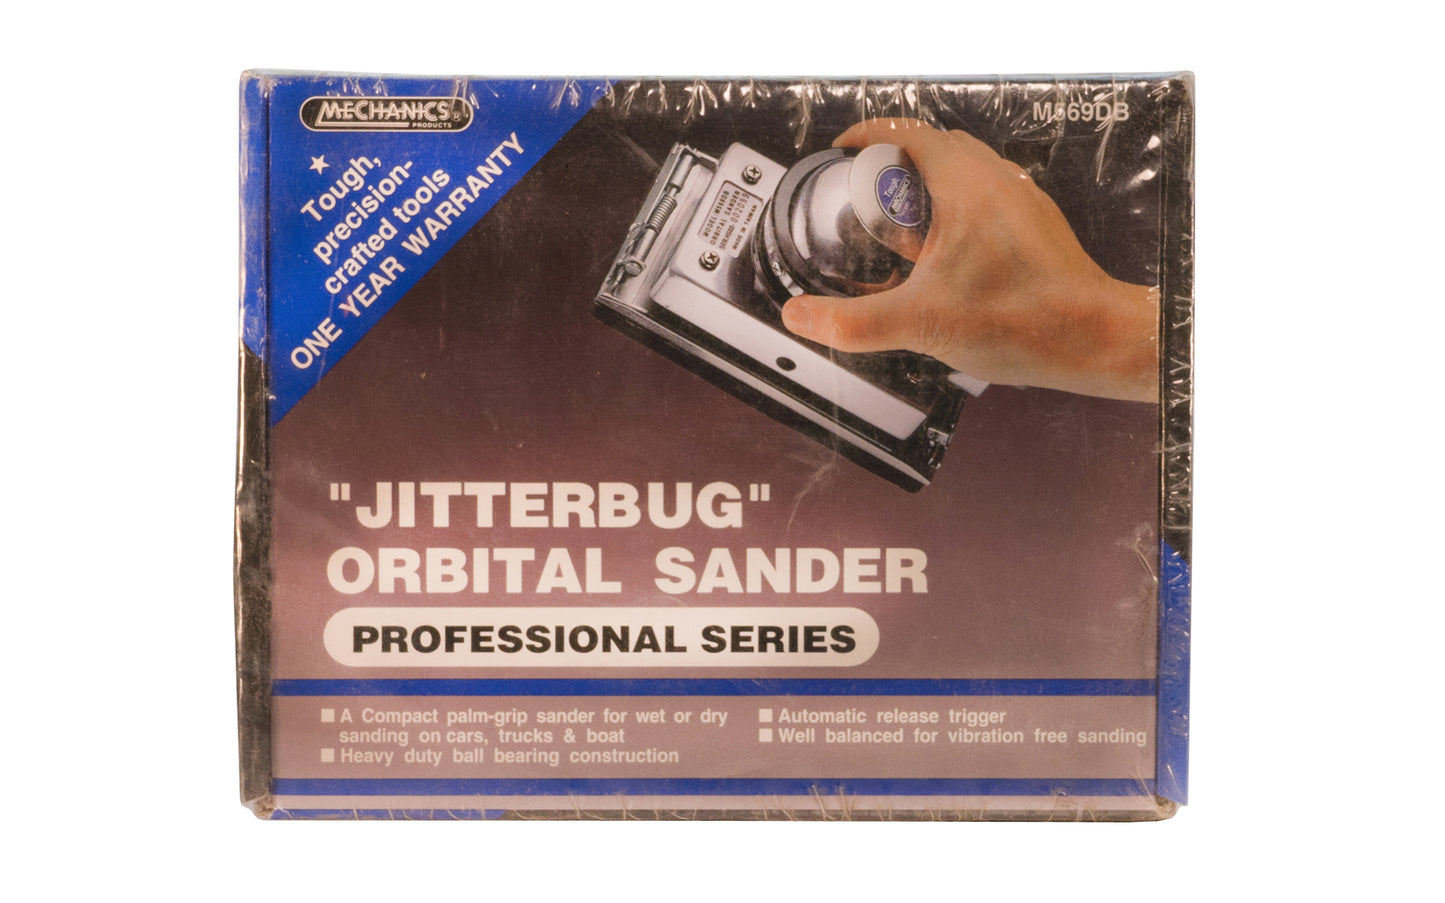 This "Jitterbug" Orbital Sander is a compact palm-grip sander designed for wet or dry sanding on cars, trucks, & boats. Heavy duty ball bearing construction. Automatic release trigger. Well balanced for vibration free sanding. 3-3/4" x 9" paper size. Orbital Stroke 3/16". 90 PSI. 039564505690. Mechanics Products